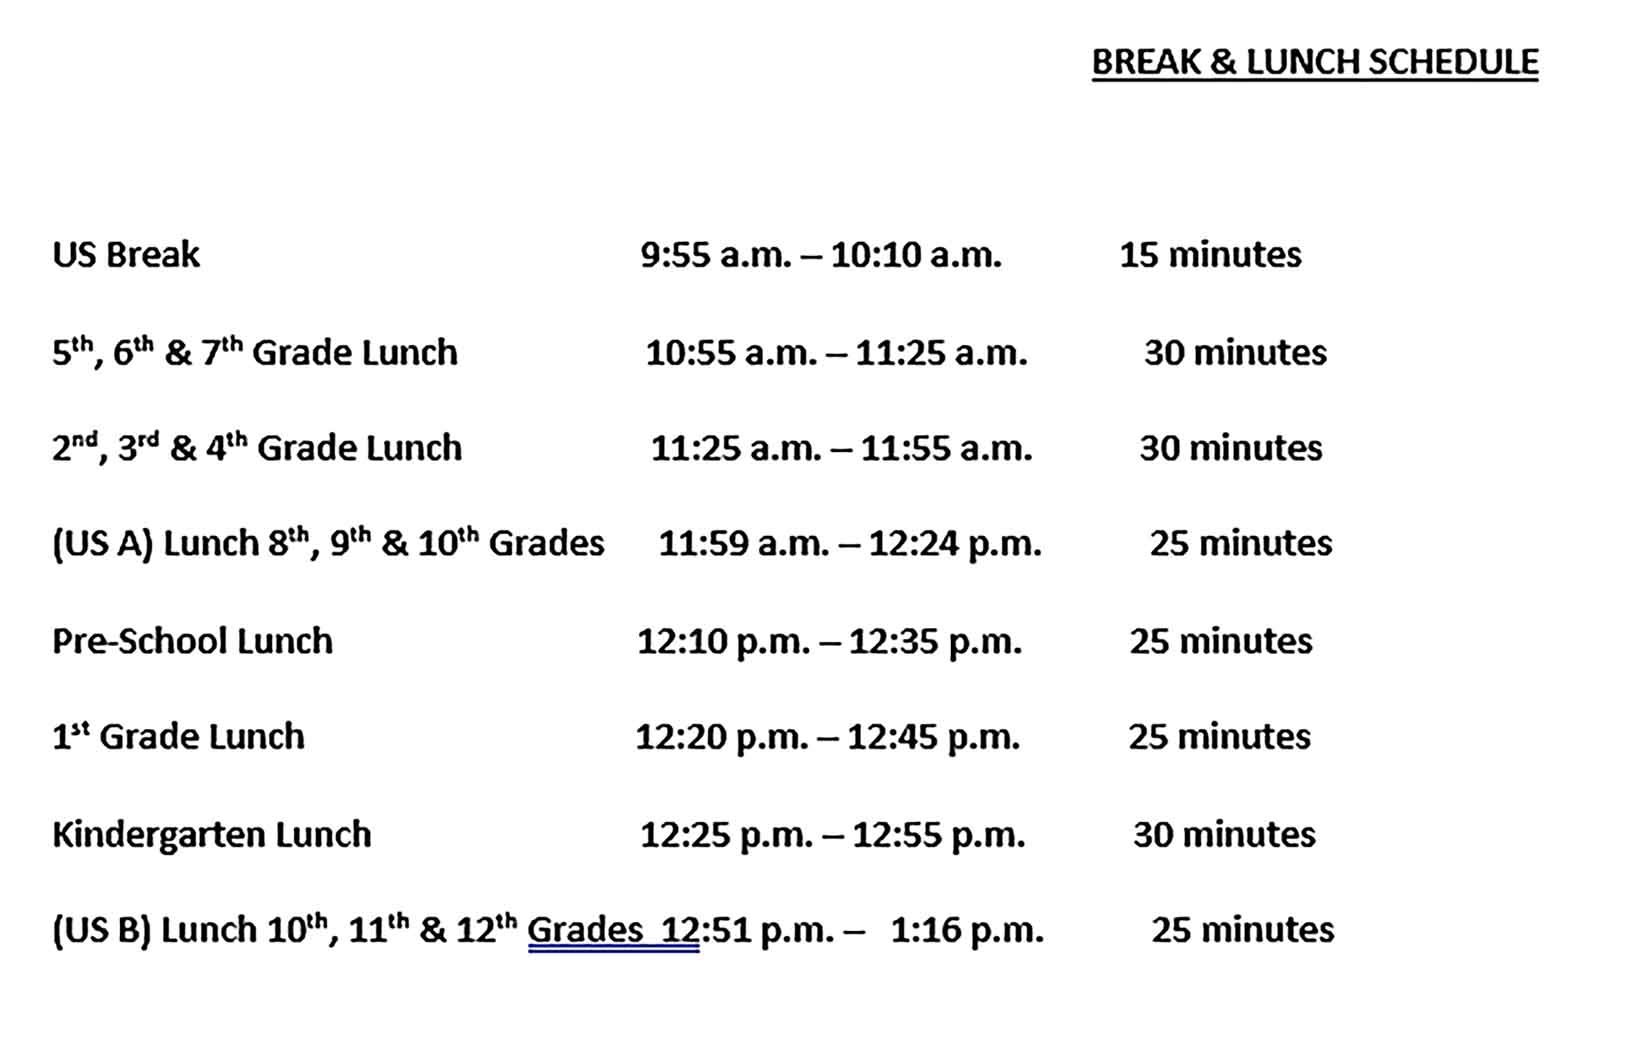 Template Lunch and Break Schedule Sample